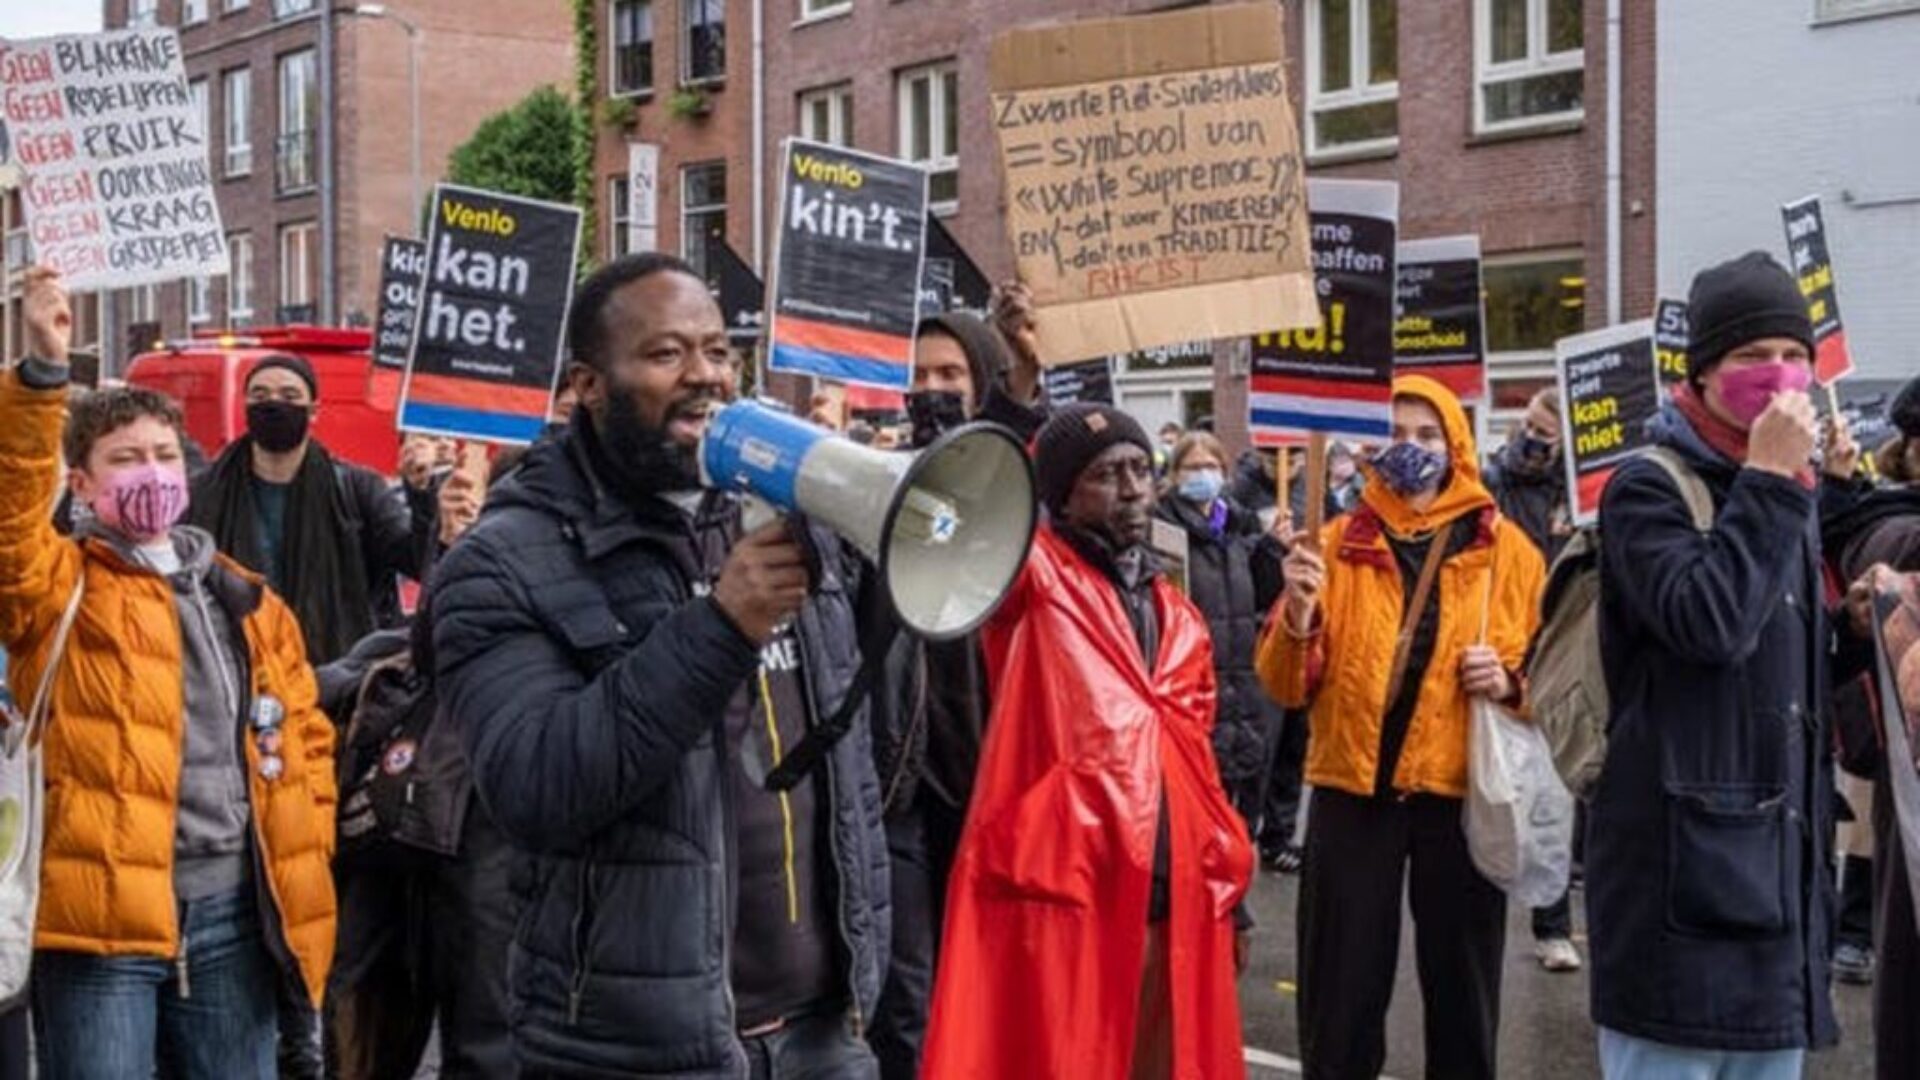 Anti-racism protesters in the Netherlands